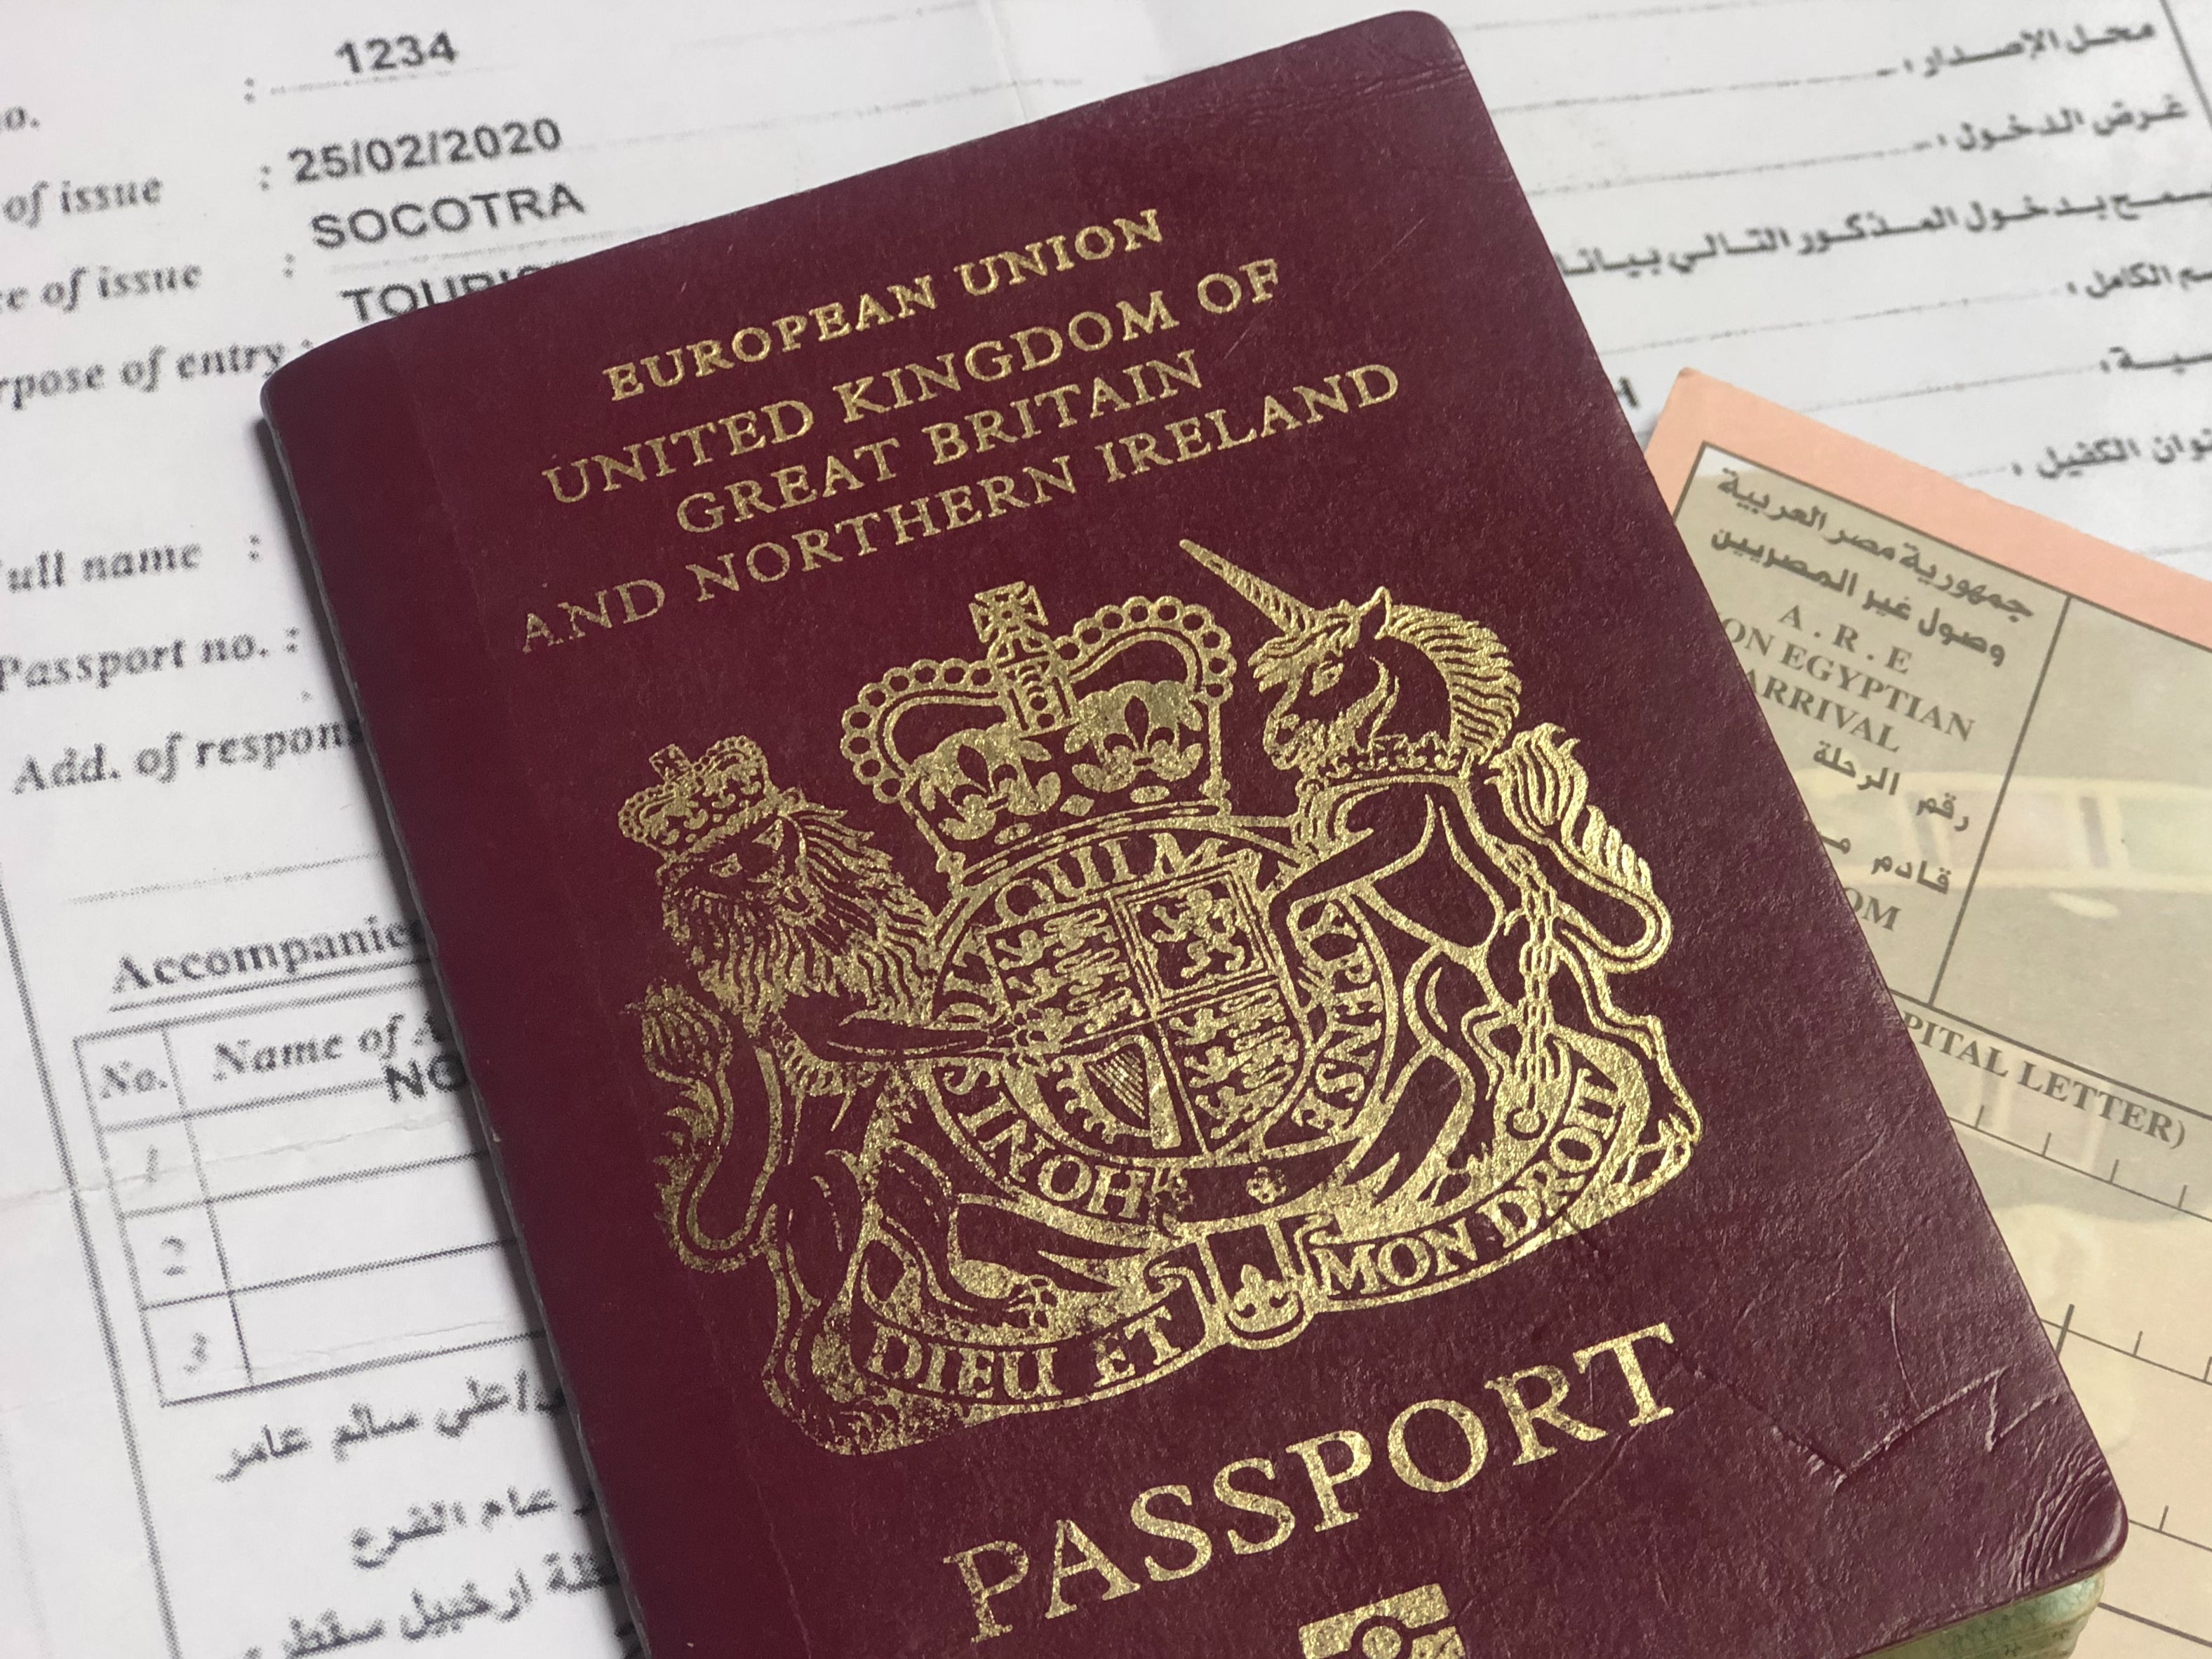 British passports used to be issued for up to 10 years and nine months